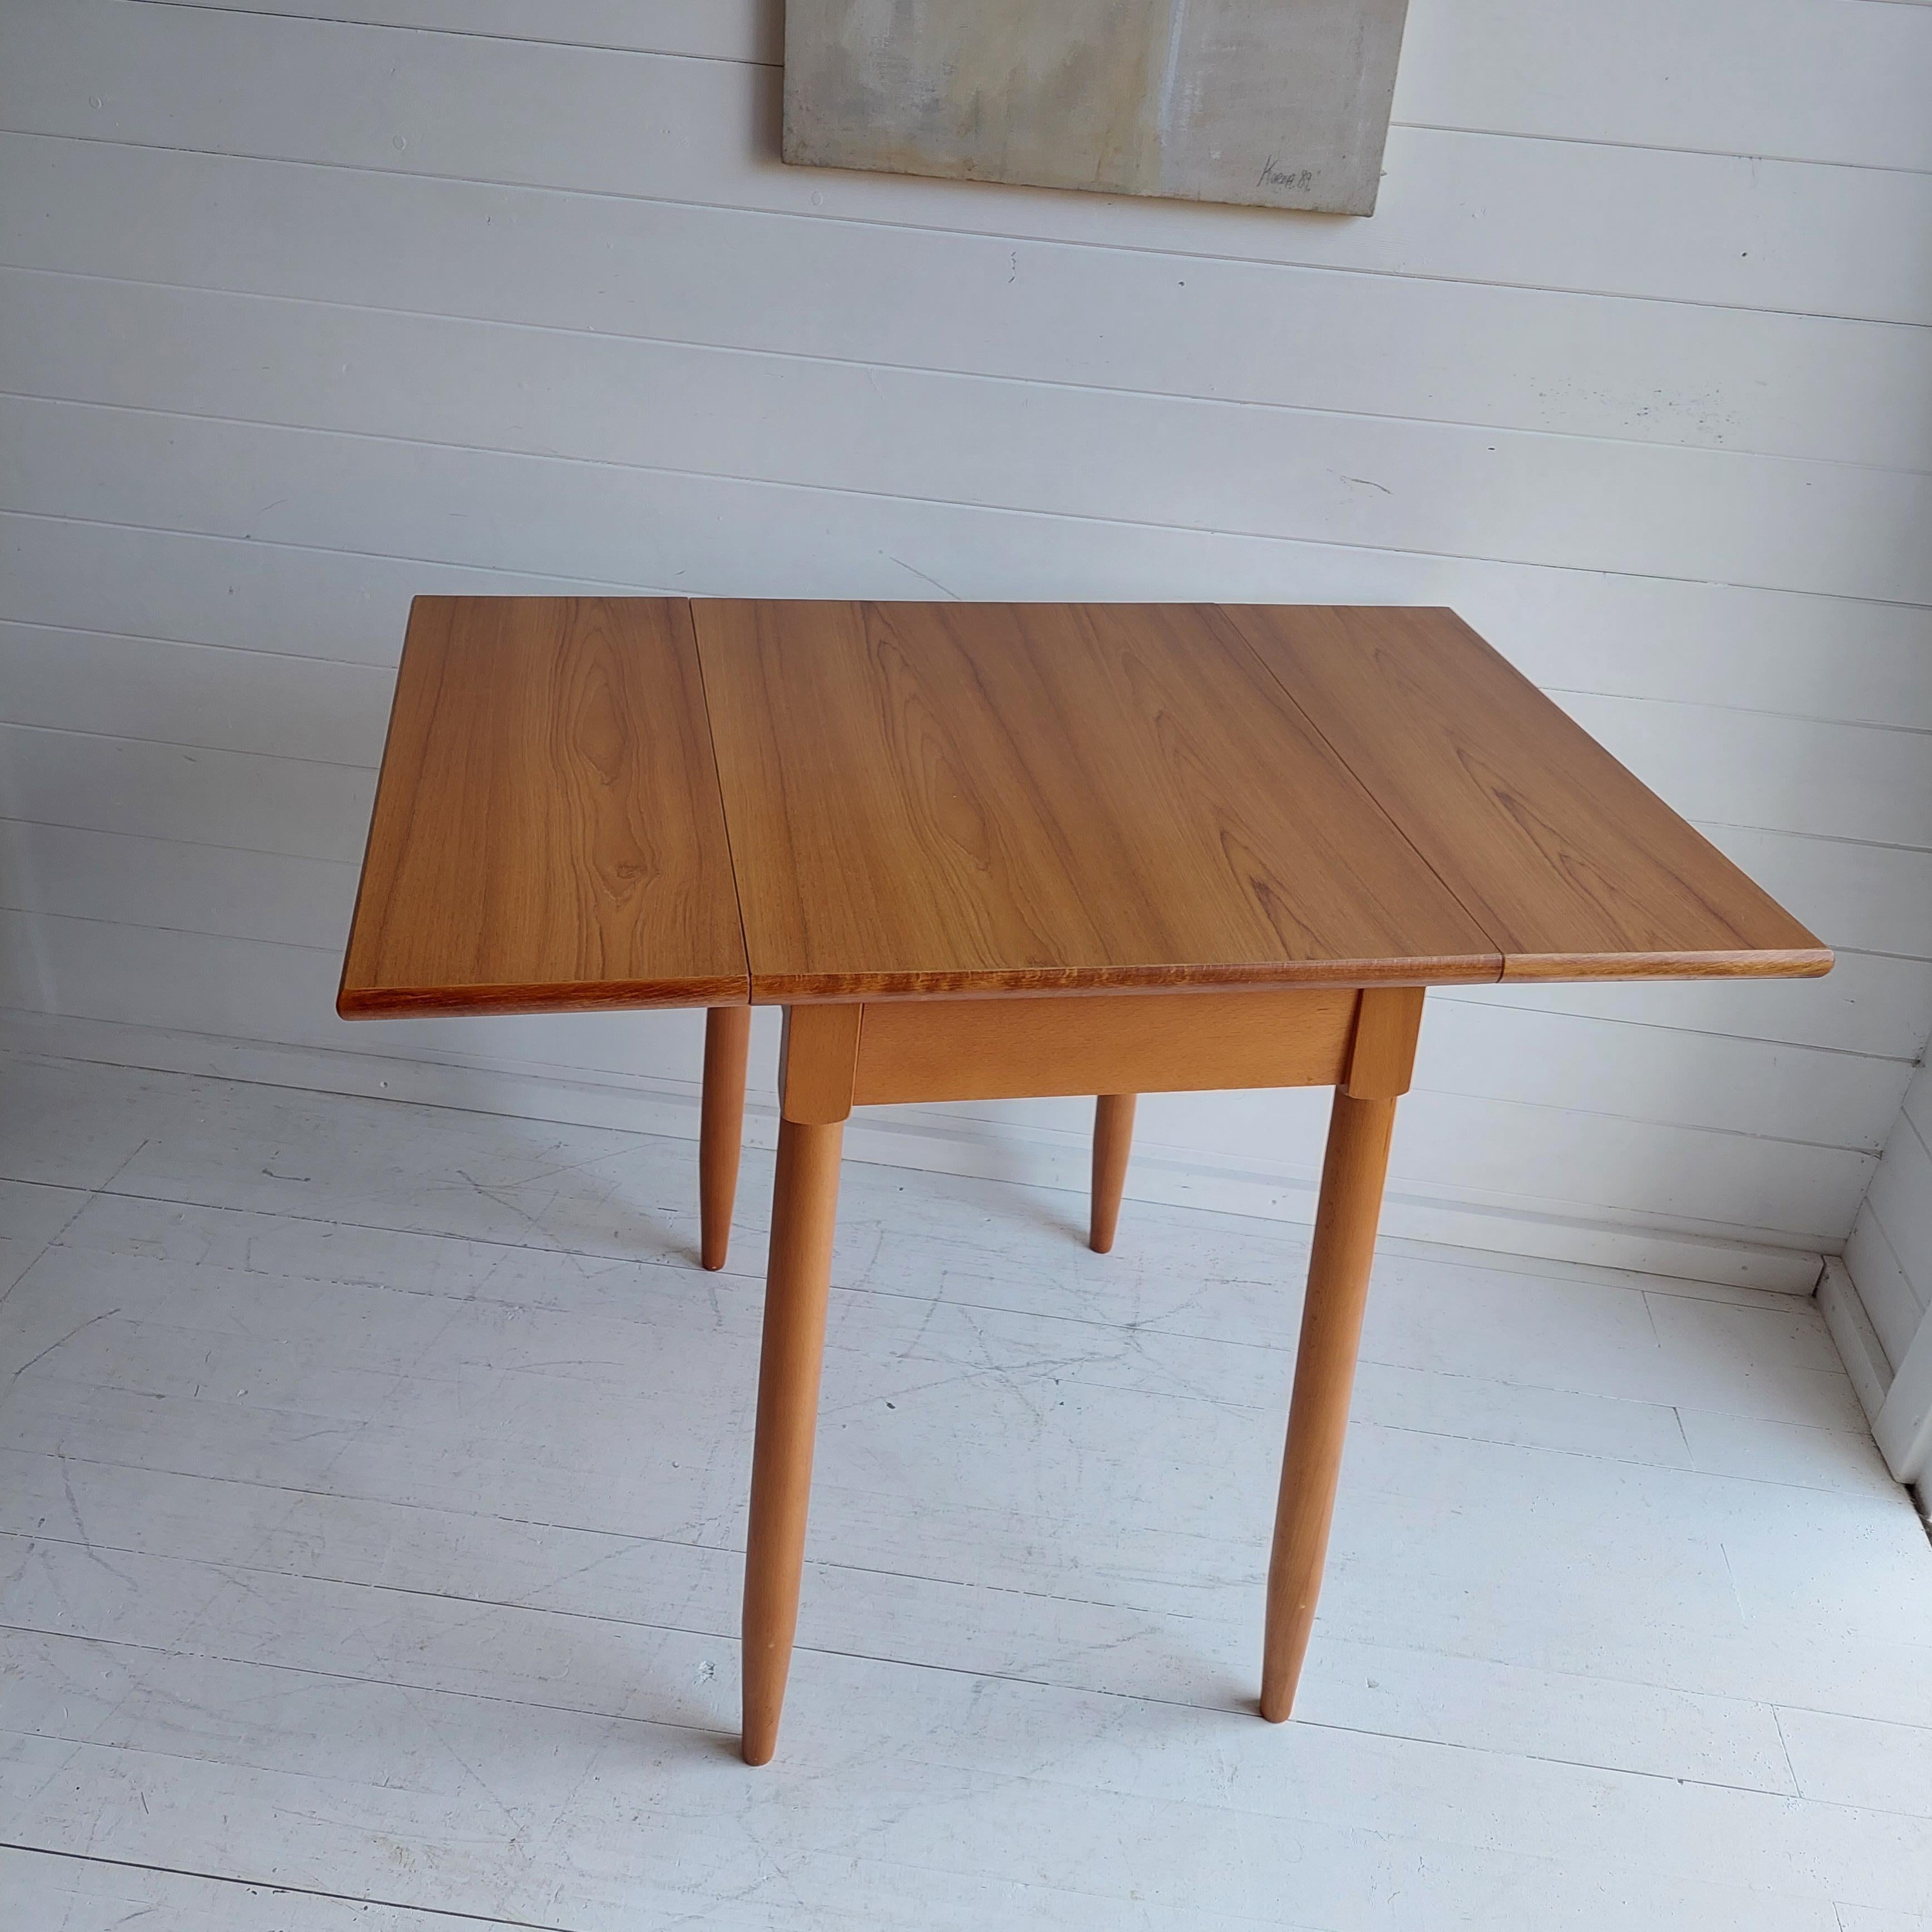 European Late Mid-Century Wood Effect Laminate Drop Leaf Kitchen Dining Table